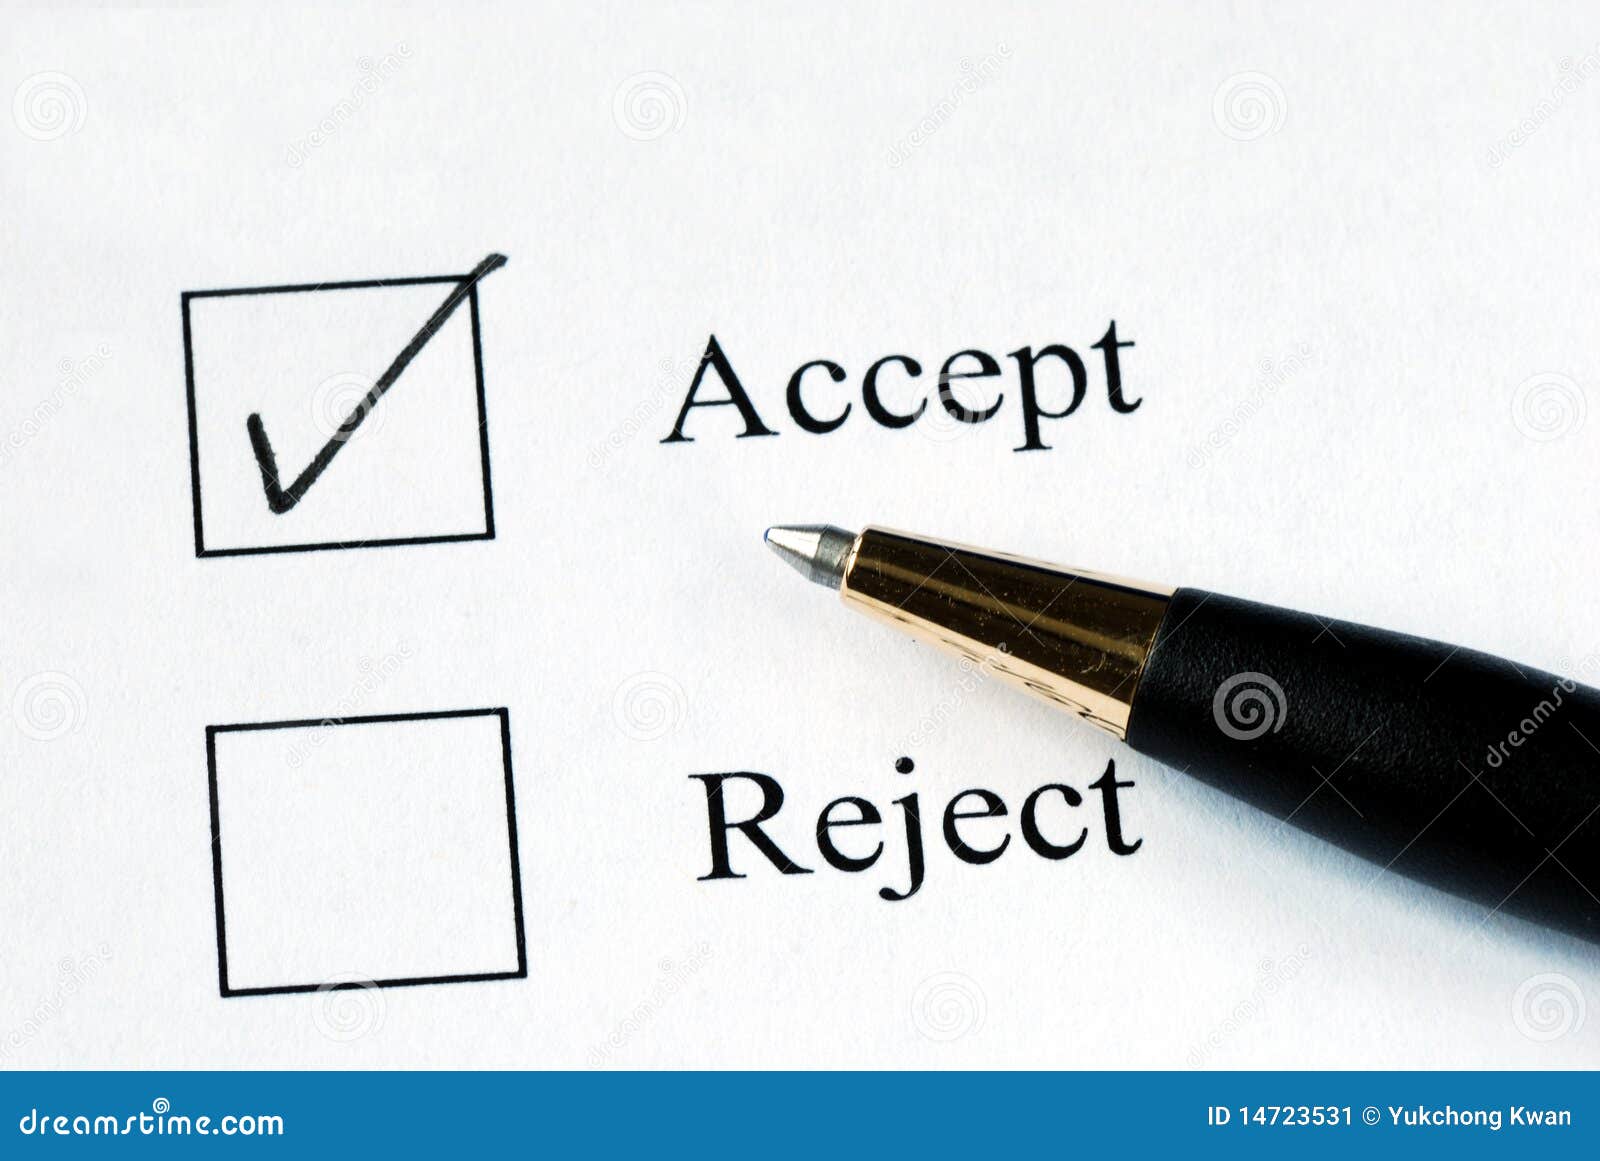 select the accept option